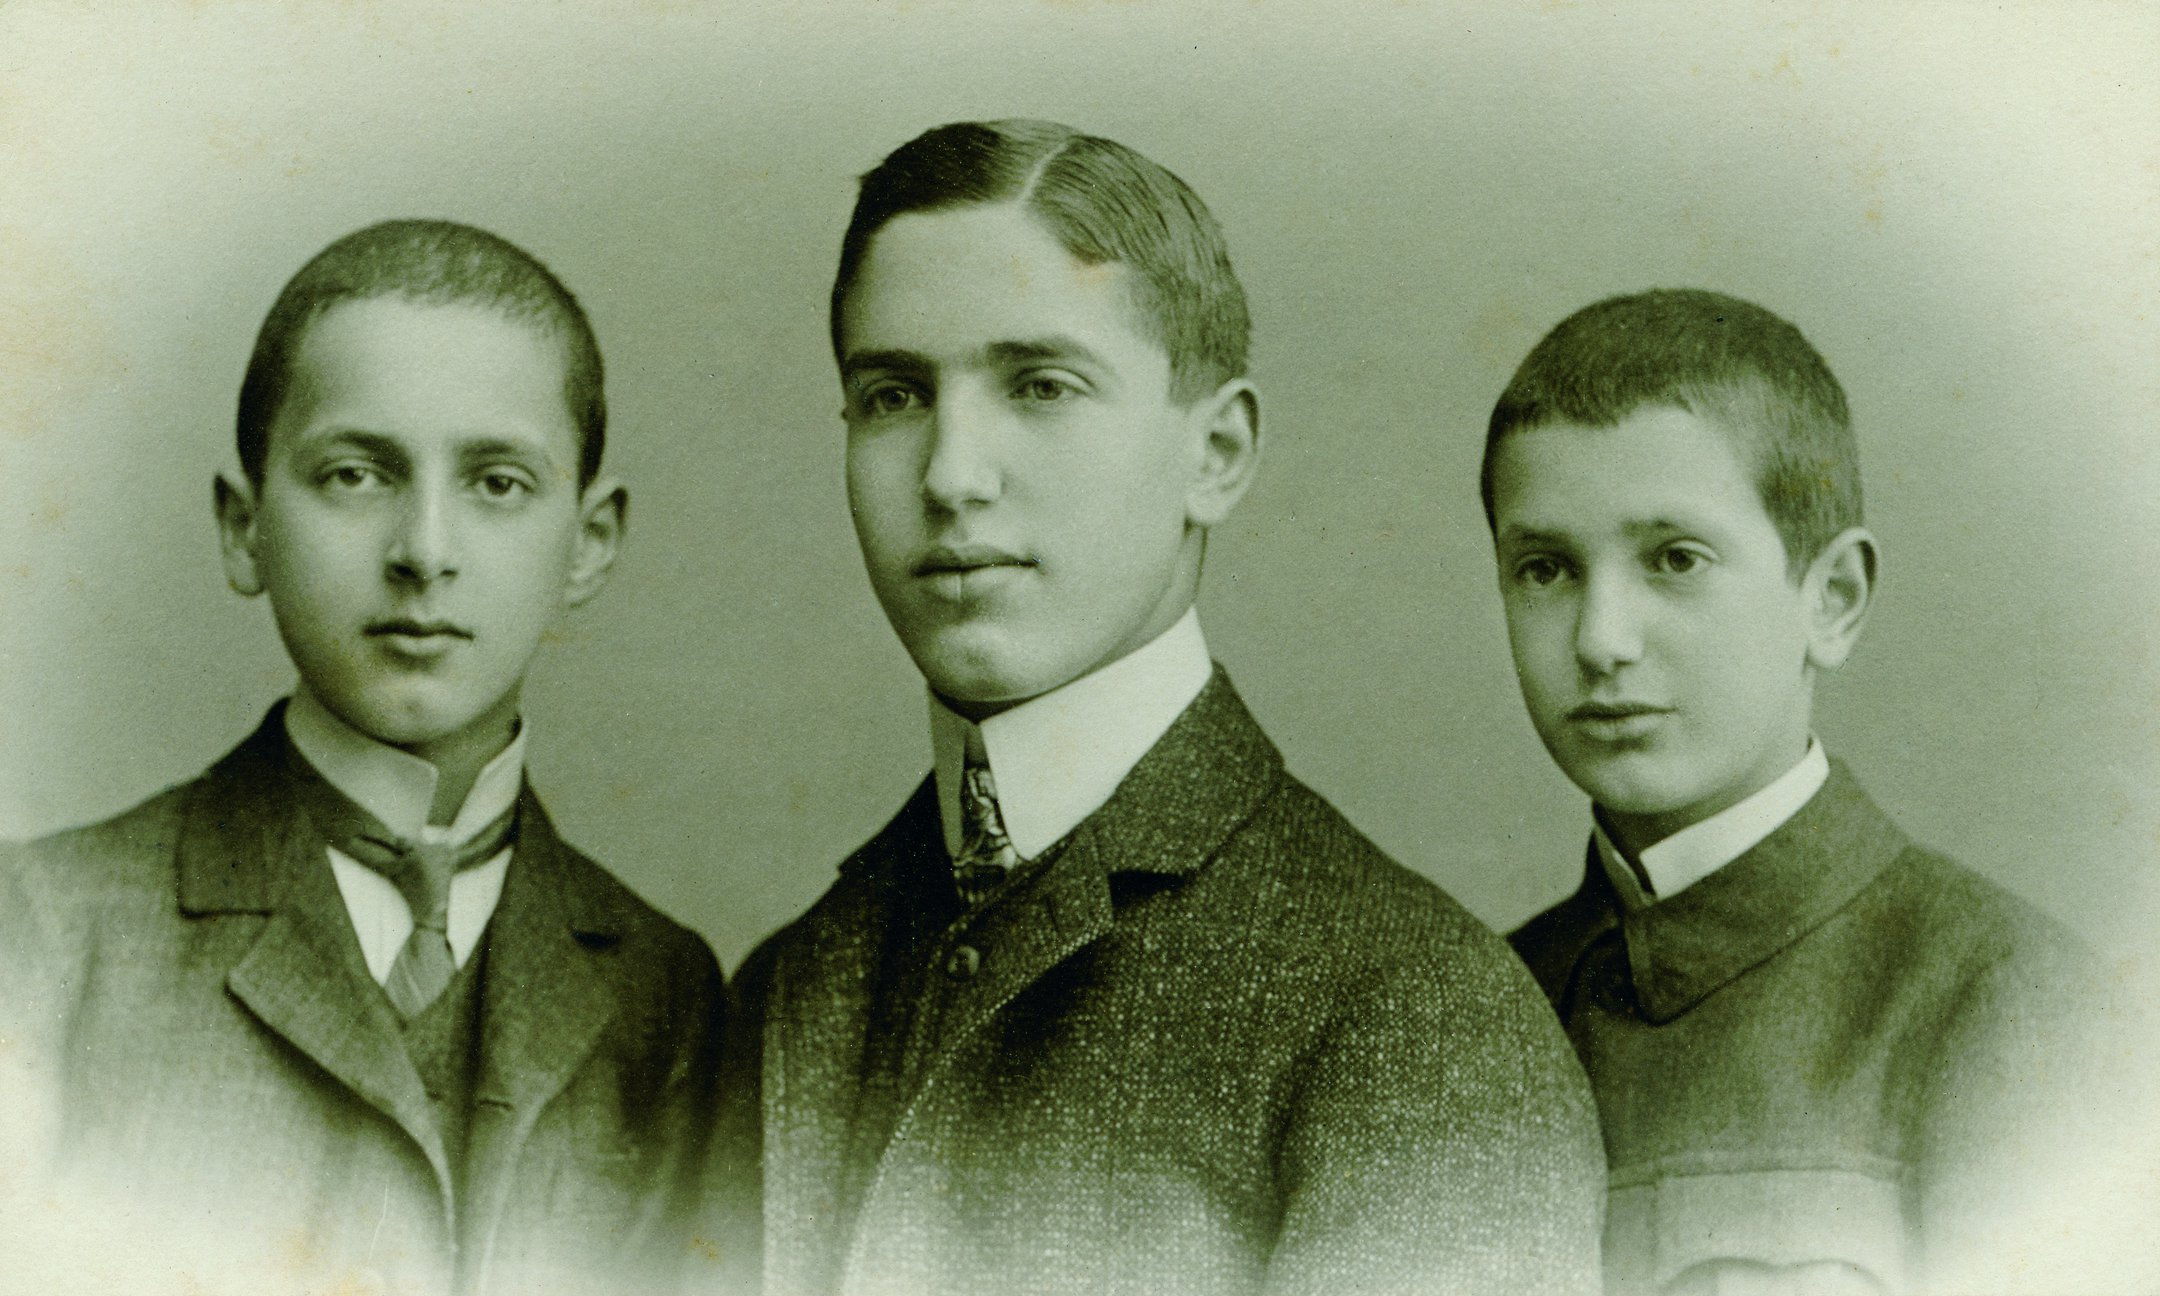 Fritz Pfeffer (middle) with two of his brothers, around 1910.